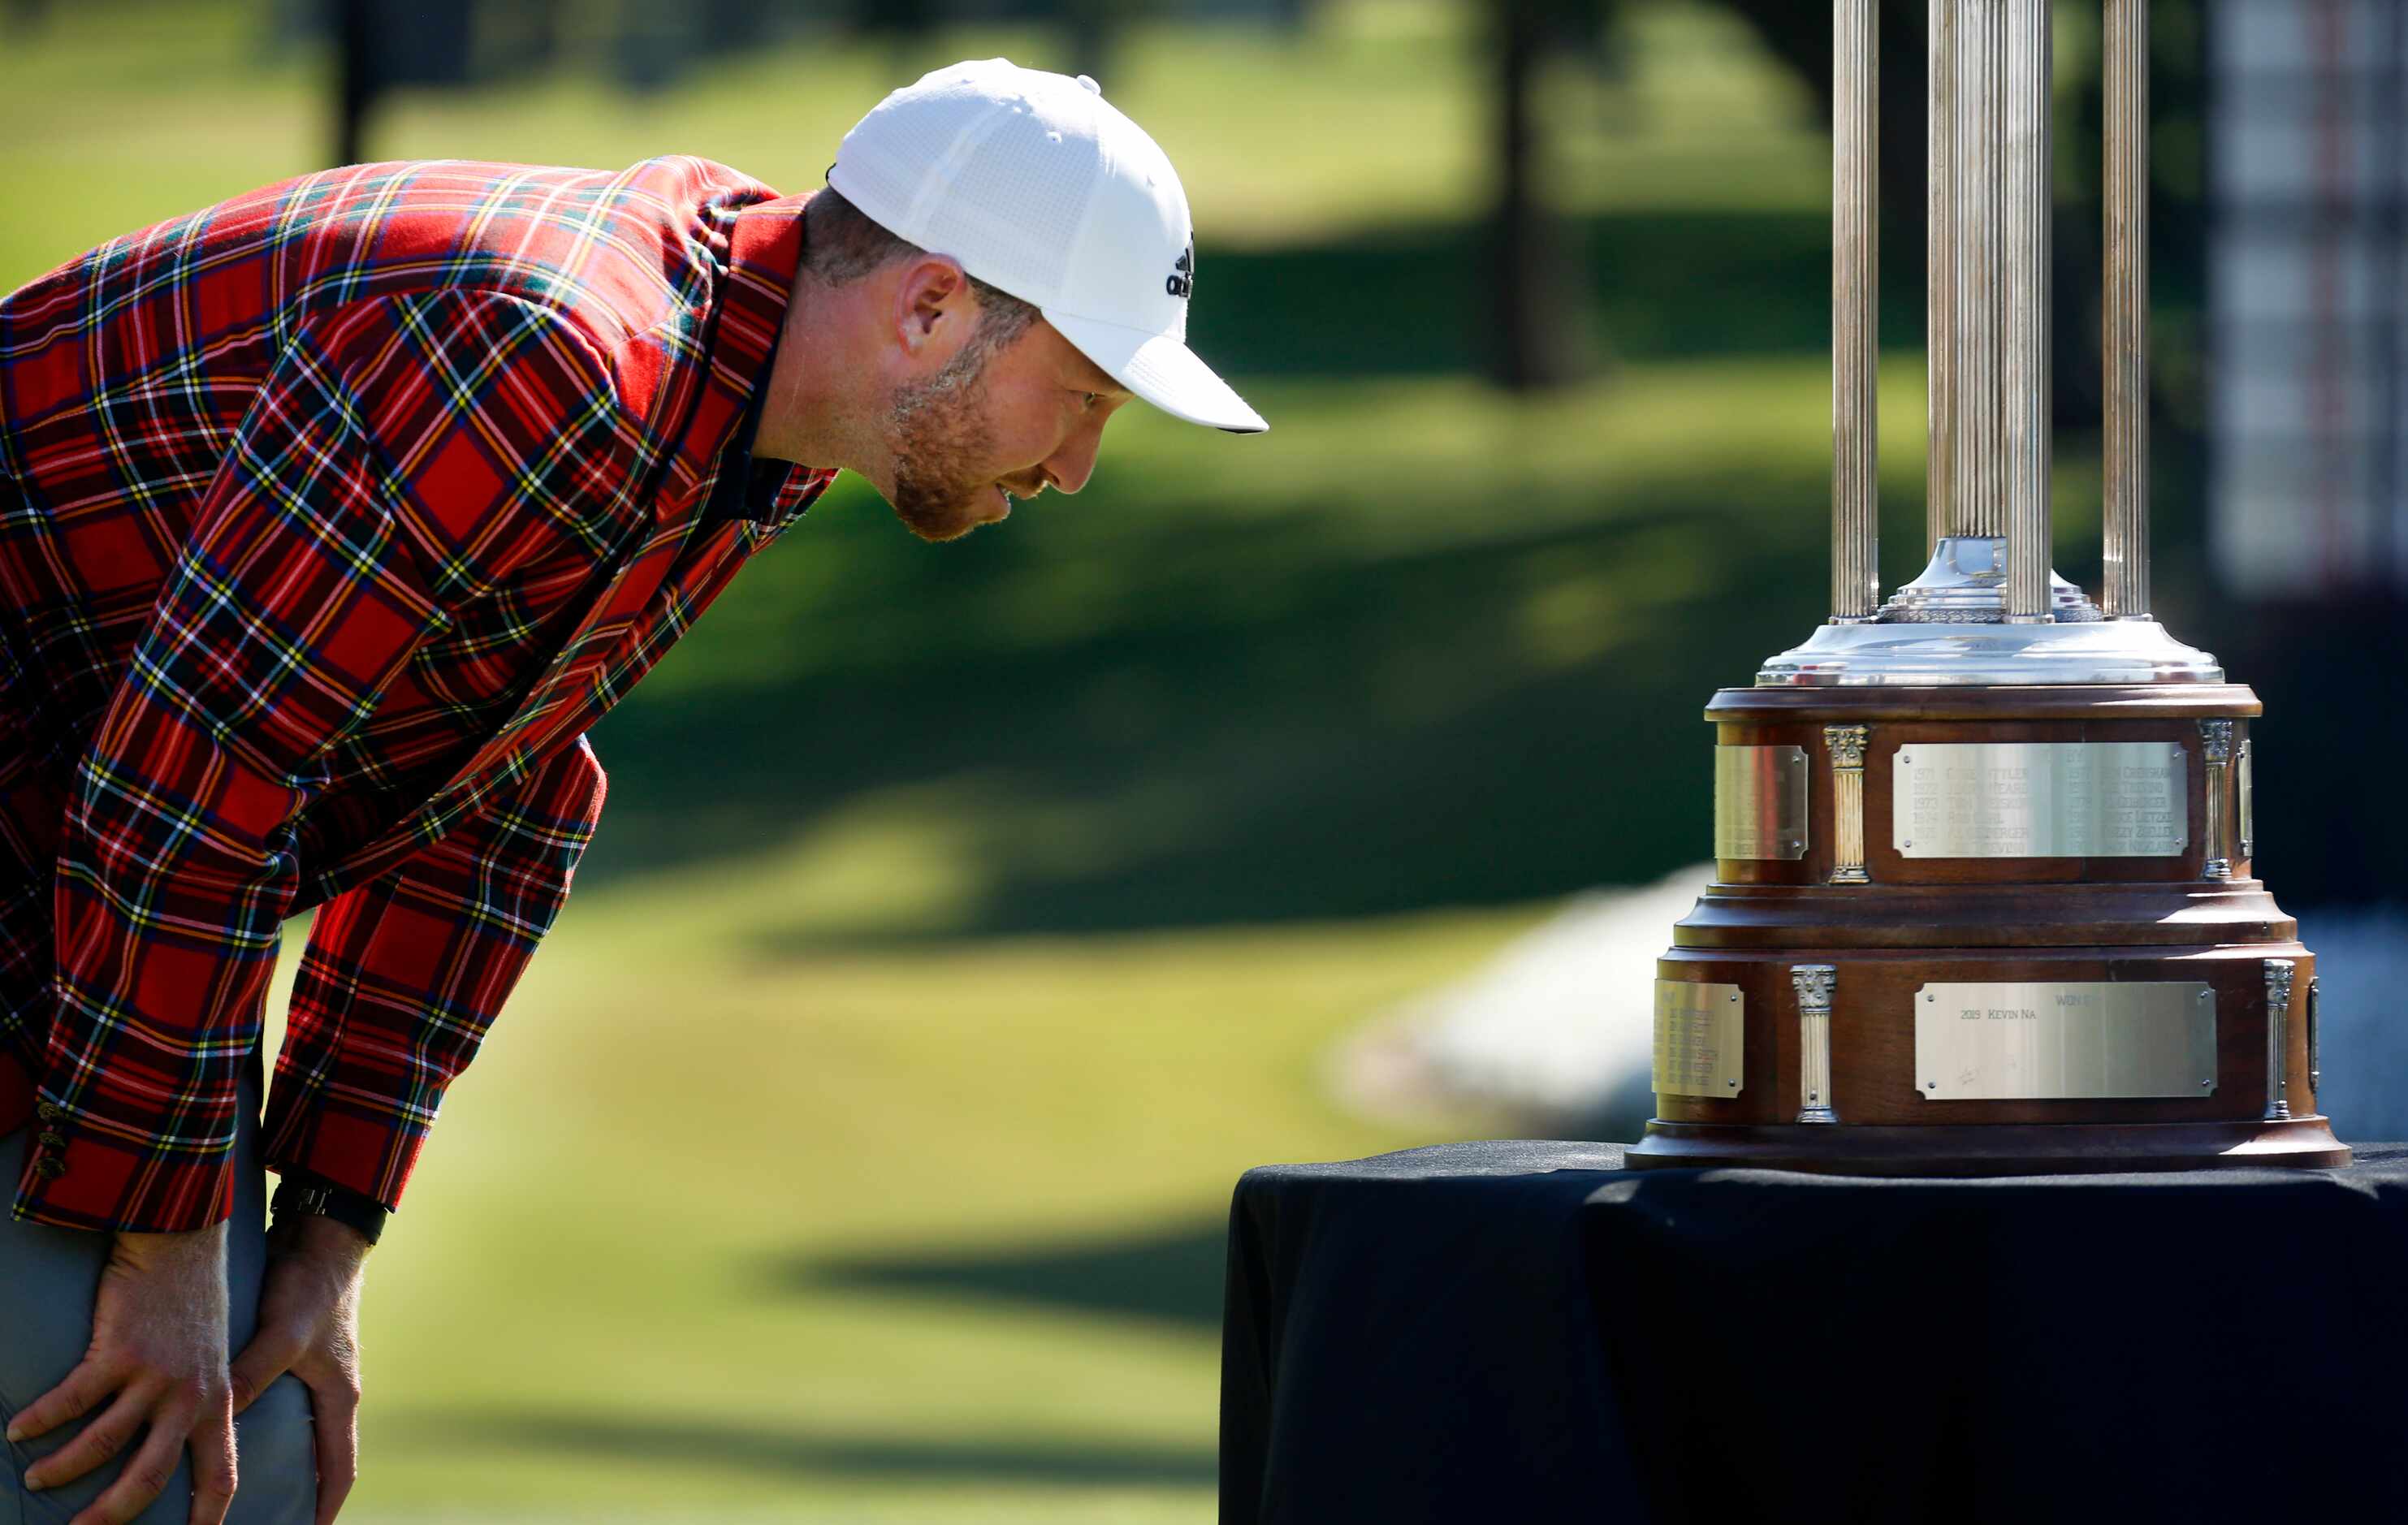 On the 18th green, PGA Tour golfer Daniel Berger looks at past winners on the Leonard Trophy...